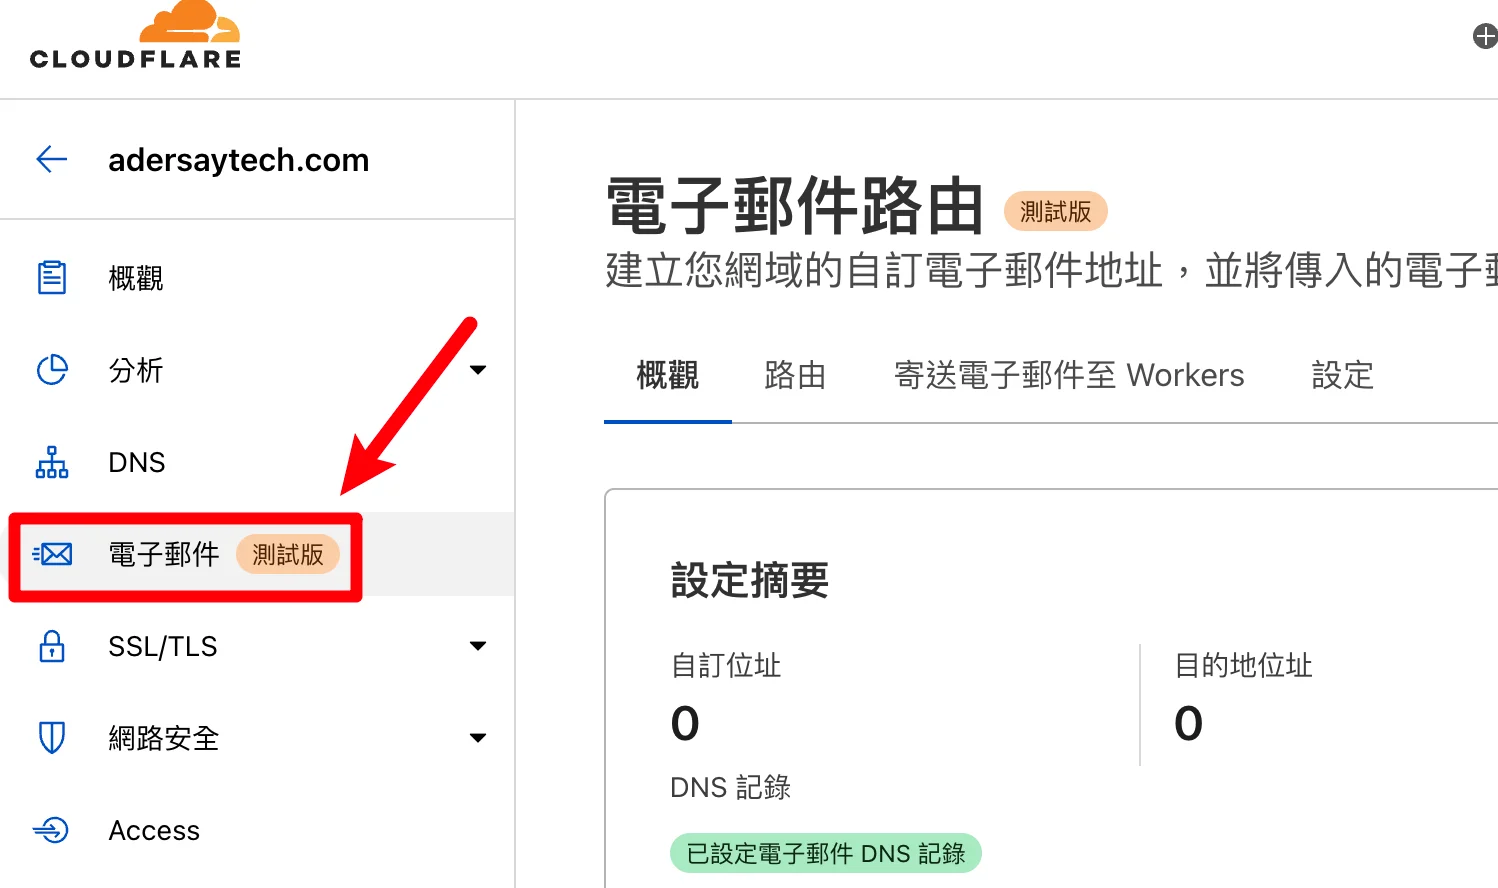 Cloudflare Email Routing 電子郵件路由，可免費自訂網域信箱！ 11